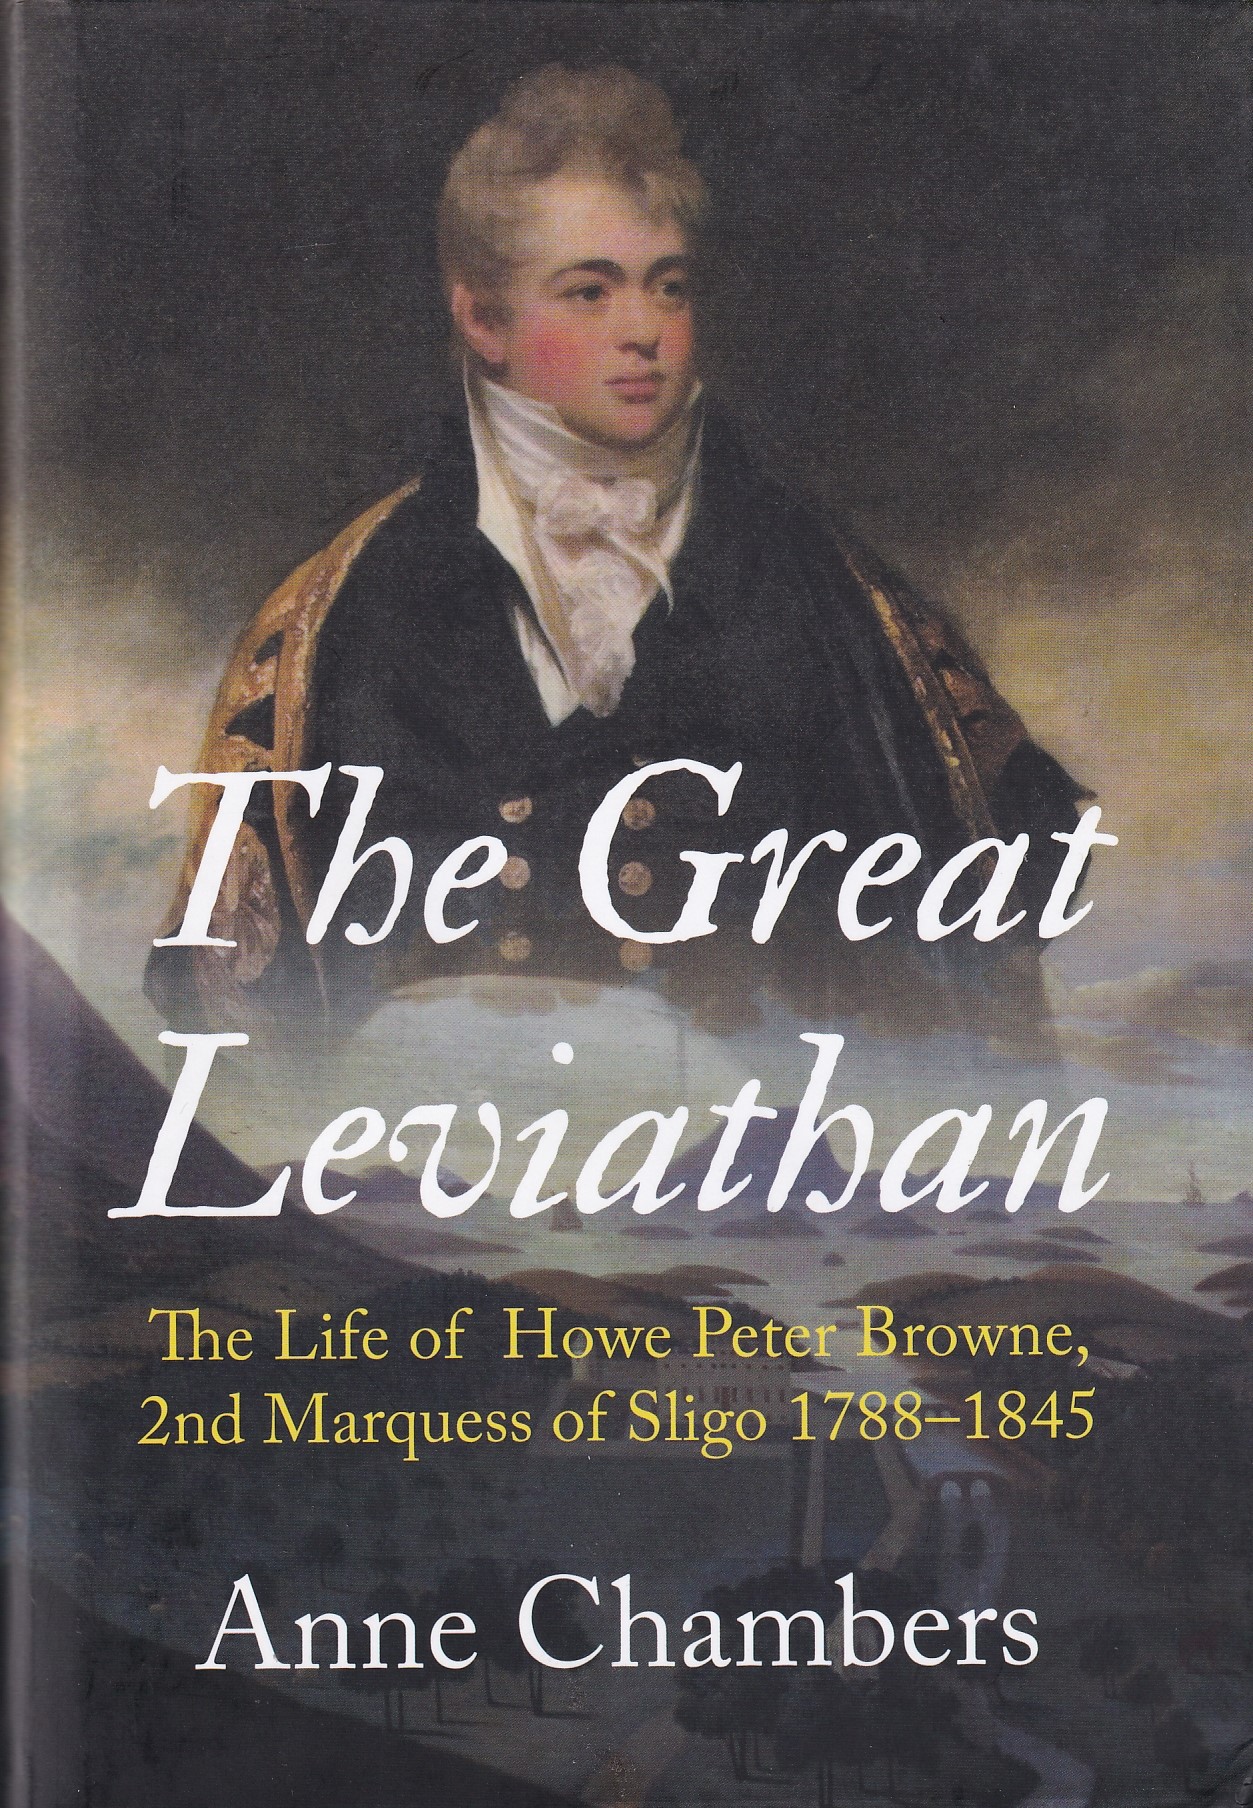 The Great Leviathan: The Life of Howe Peter Browne, Marquess of Sligo 1788-1845 by Anne Chambers